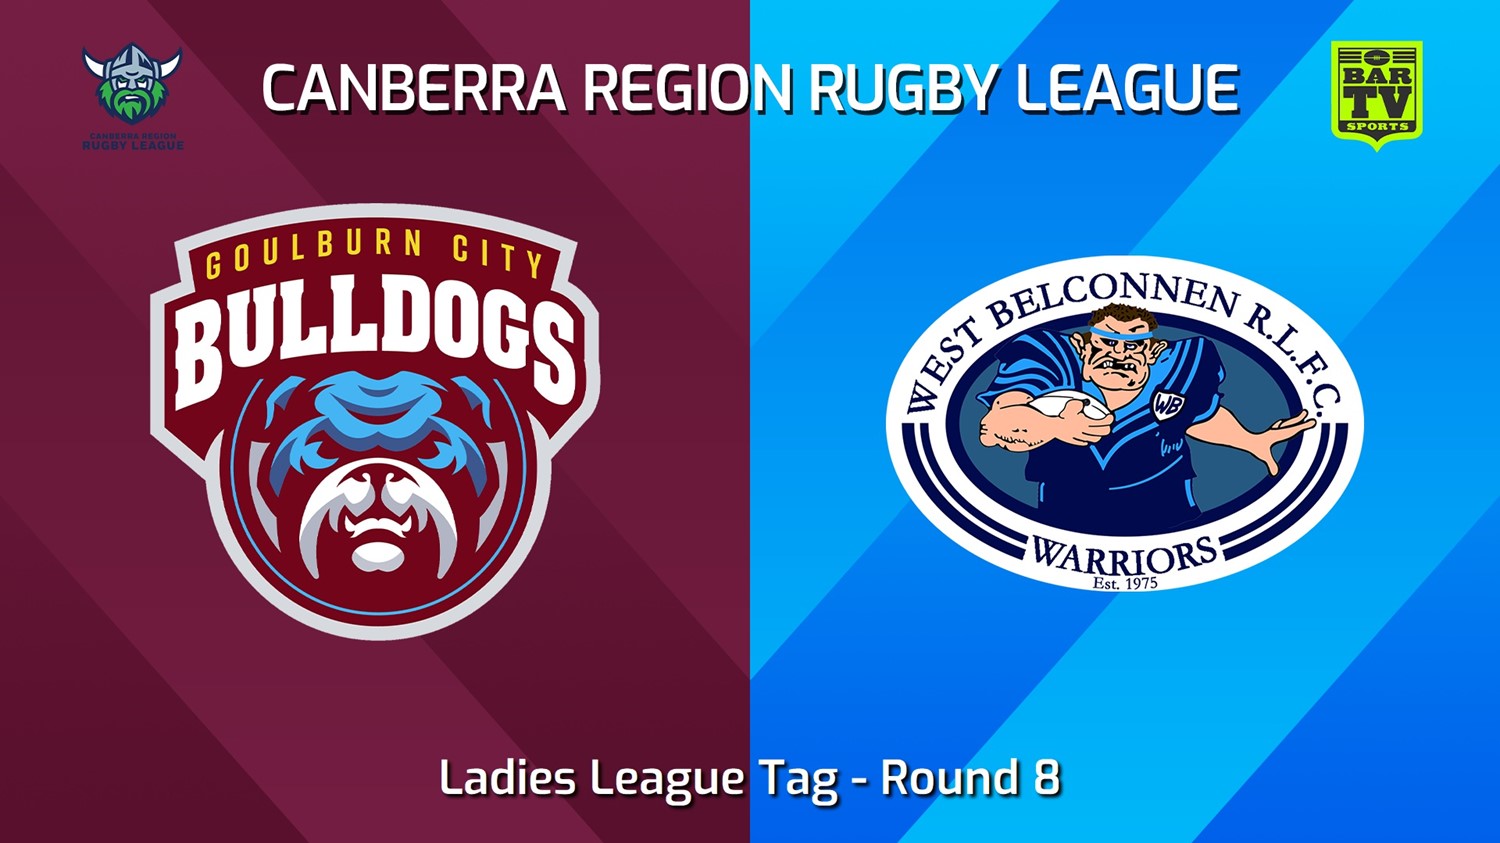 240525-video-Canberra Round 8 - Ladies League Tag - Goulburn City Bulldogs v West Belconnen Warriors Slate Image